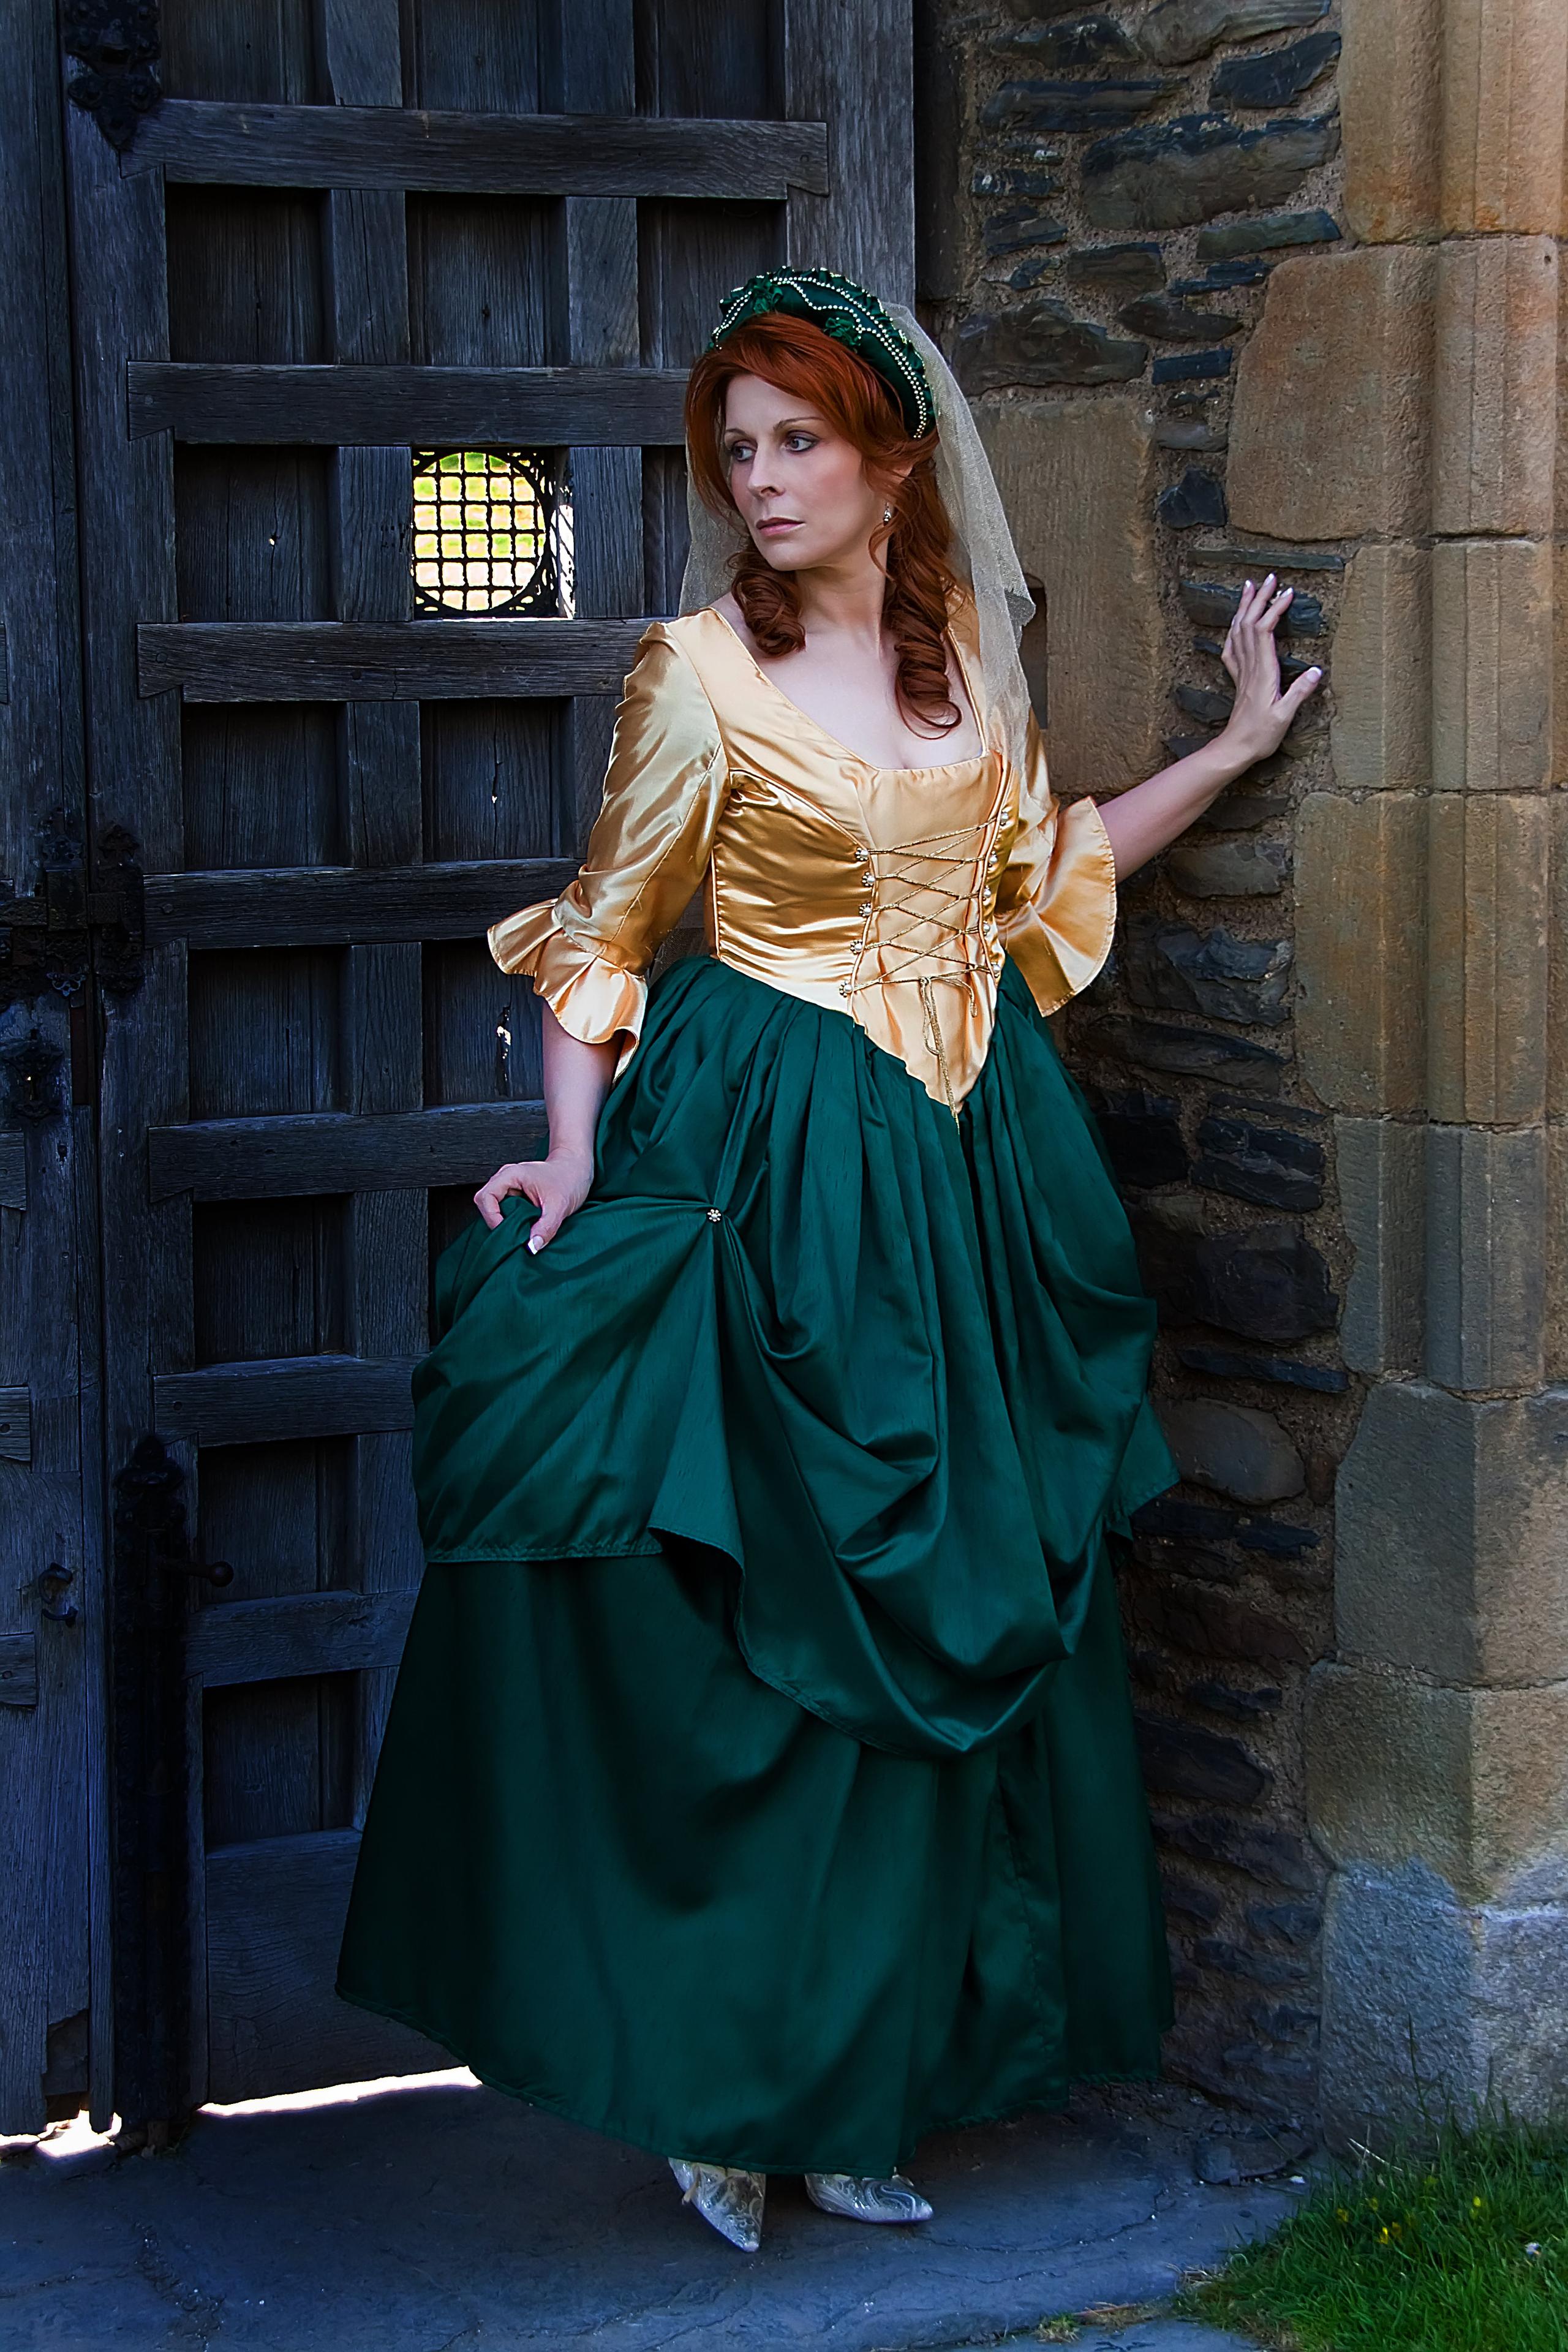 Bottle green and gold dress. Medieval style with three quarter sleeve